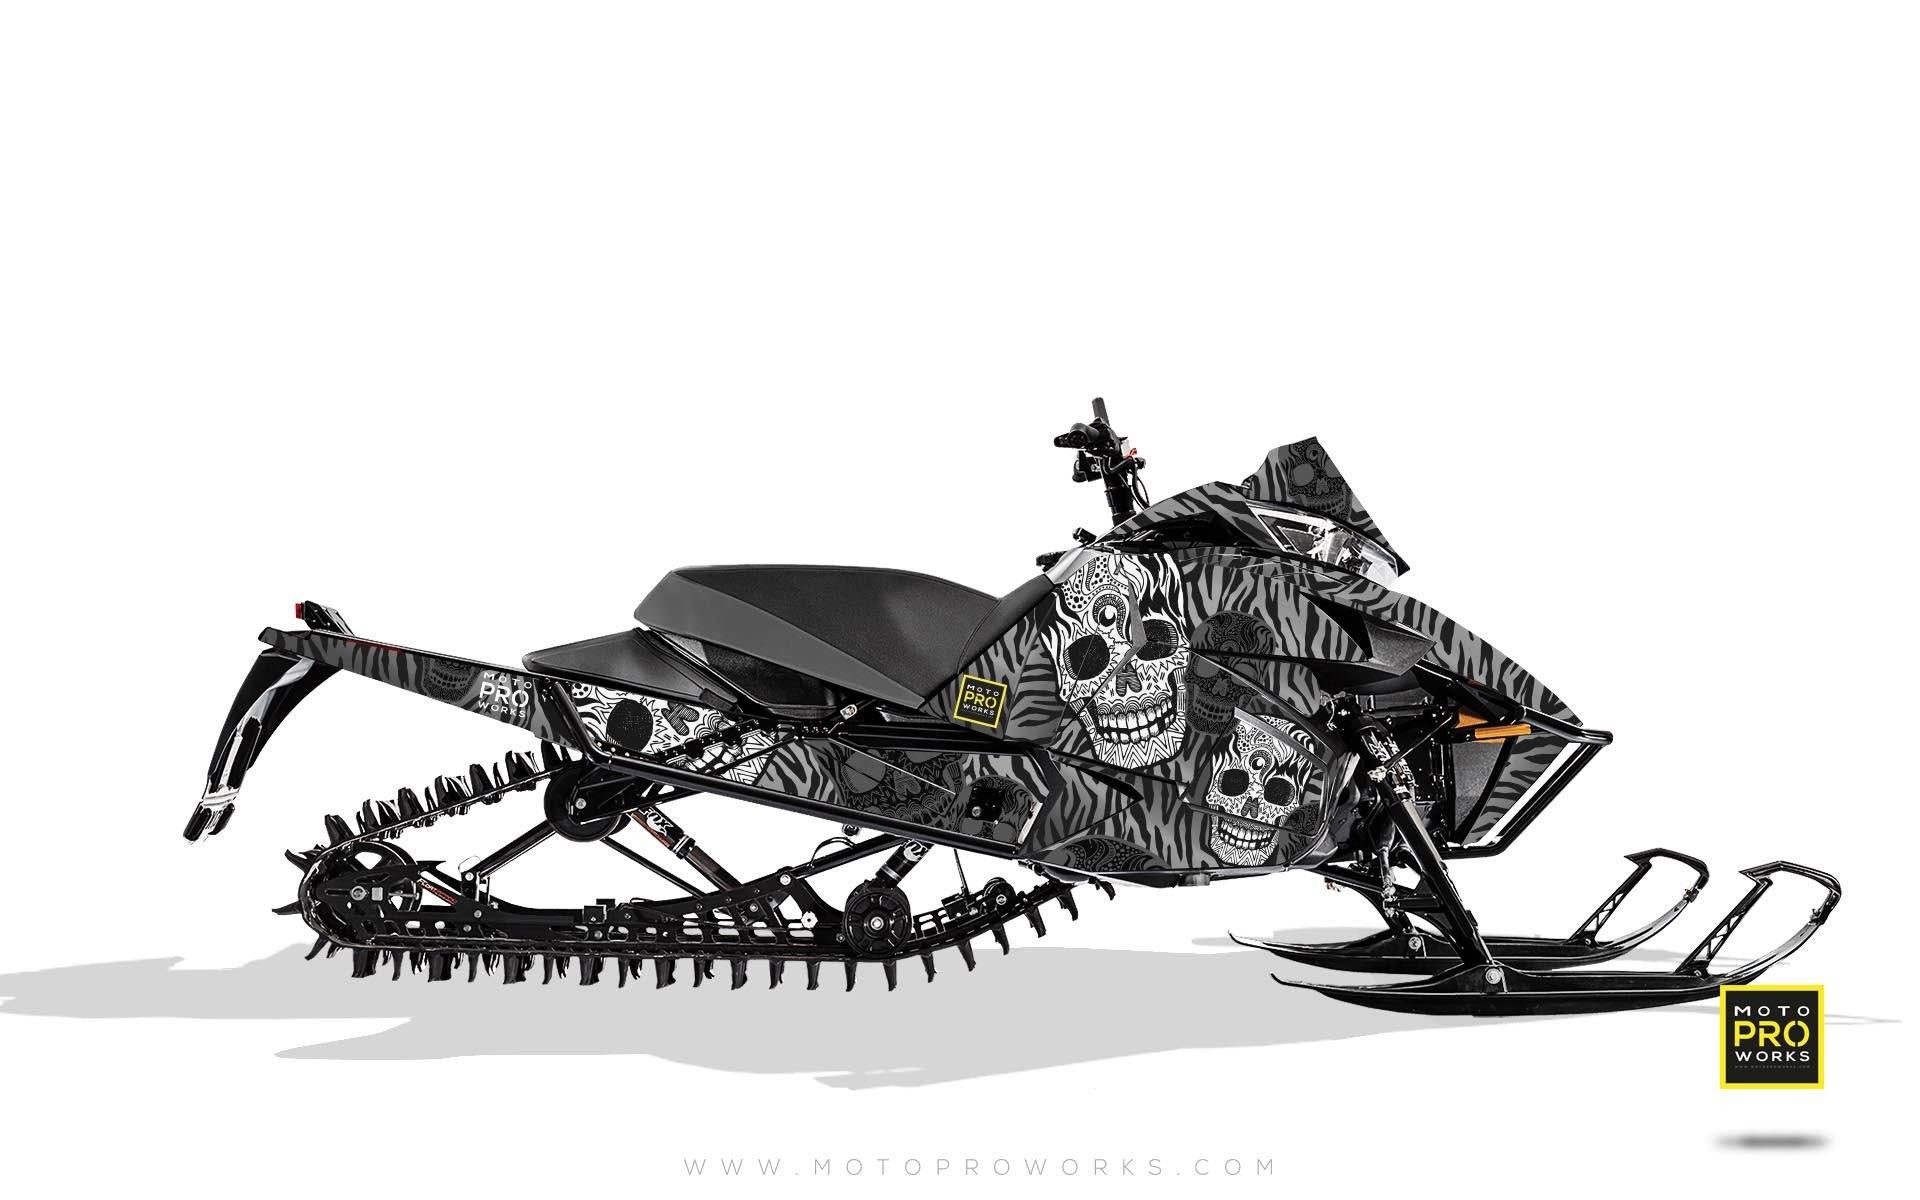 Arctic Cat Graphics - "Fiesta" (grey solid) - MotoProWorks | Decals and Bike Graphic kit